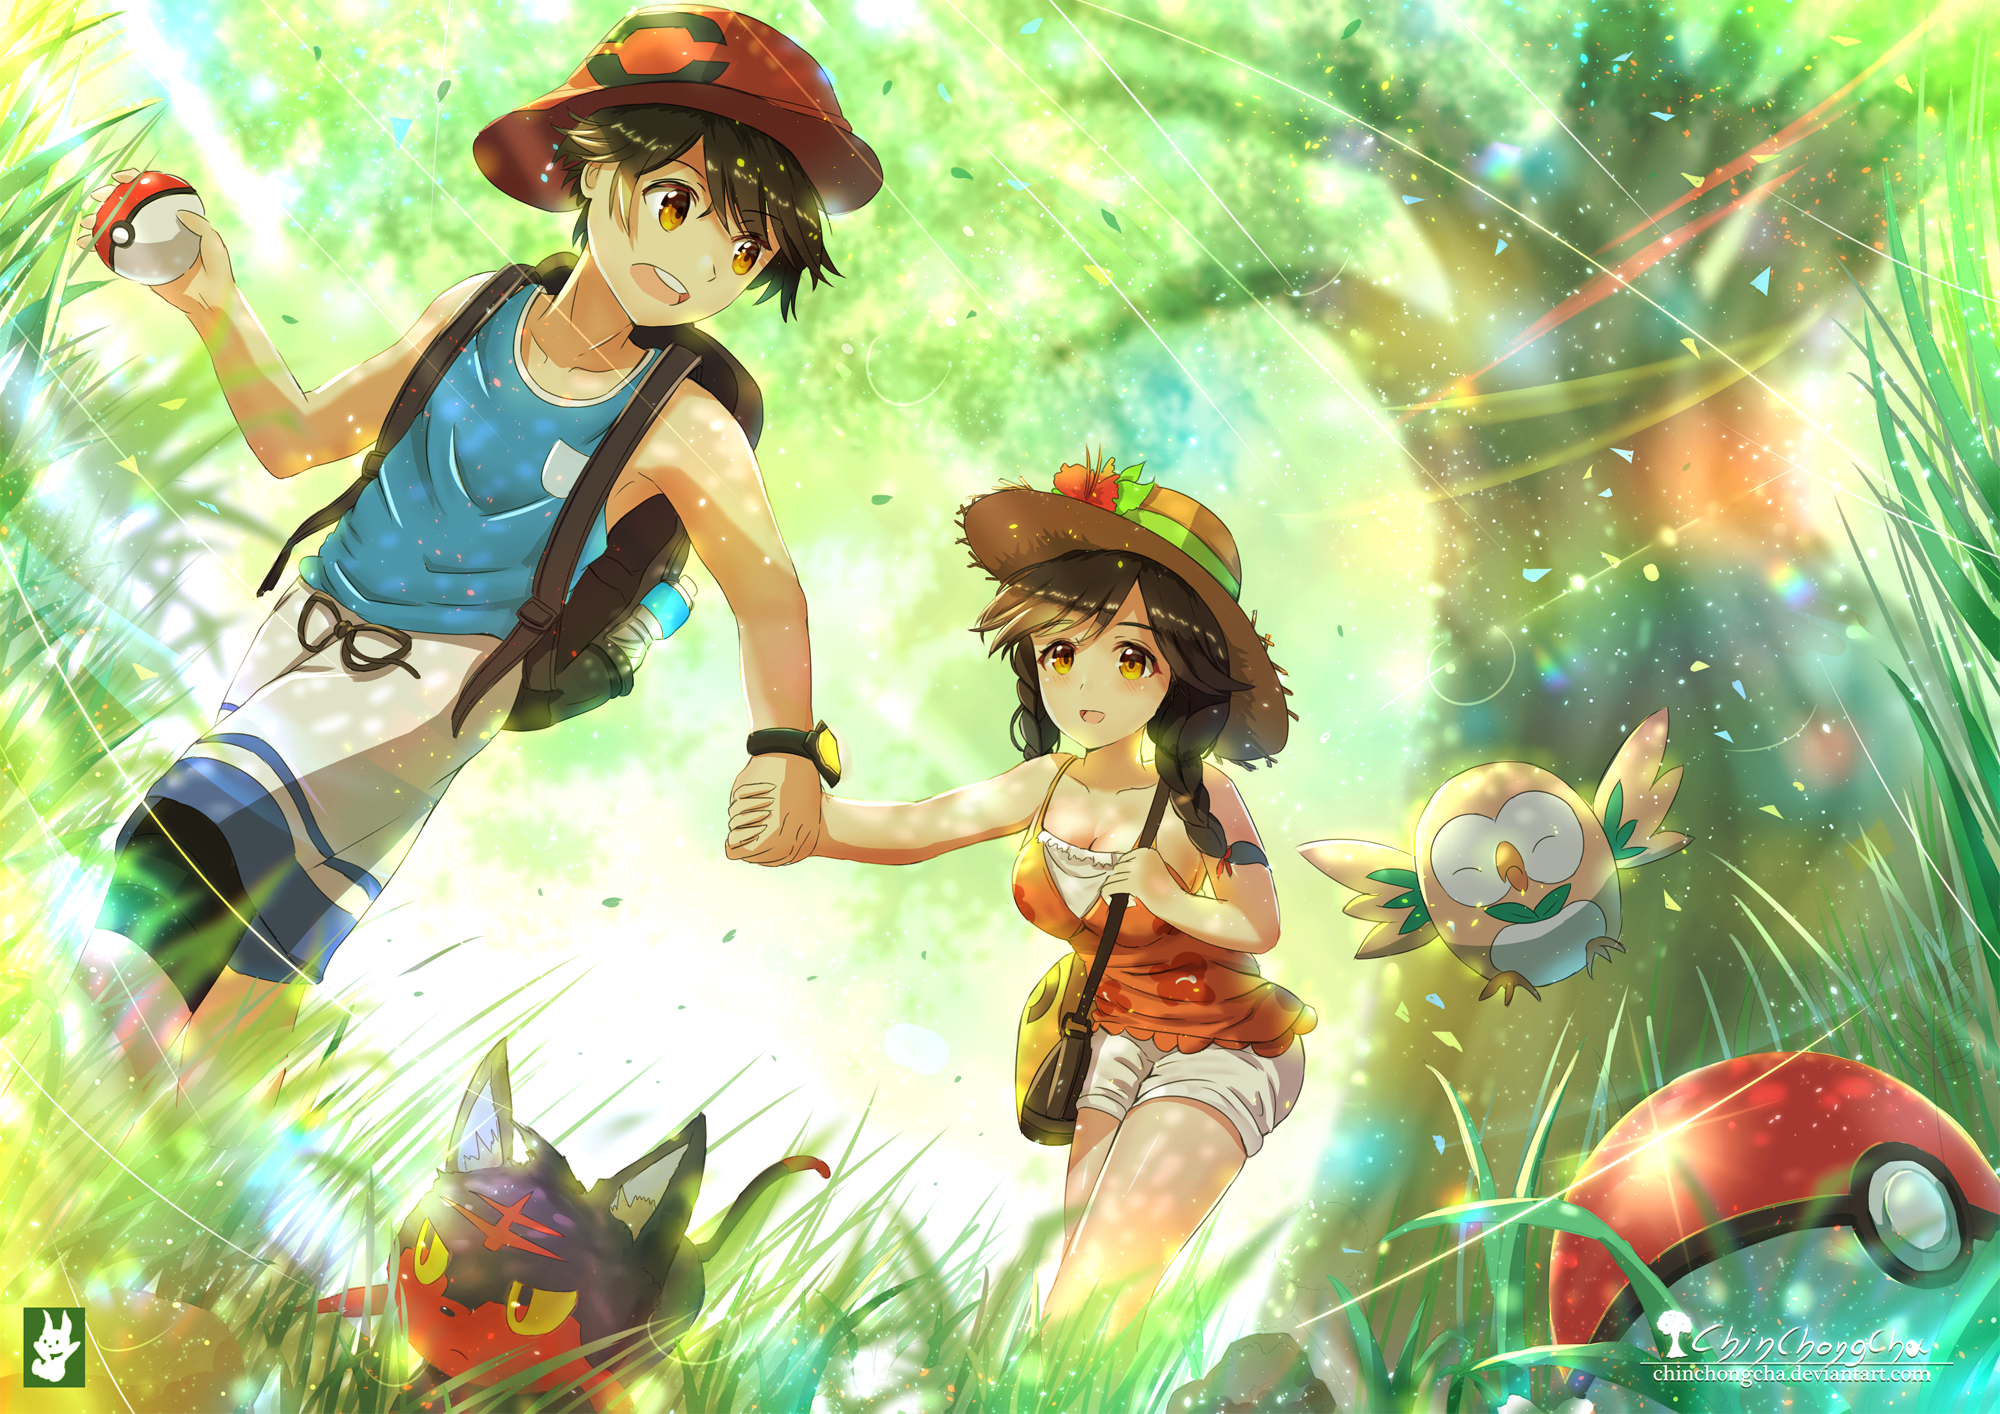 Pok Mon Sun And Moon HD Wallpaper Background Image